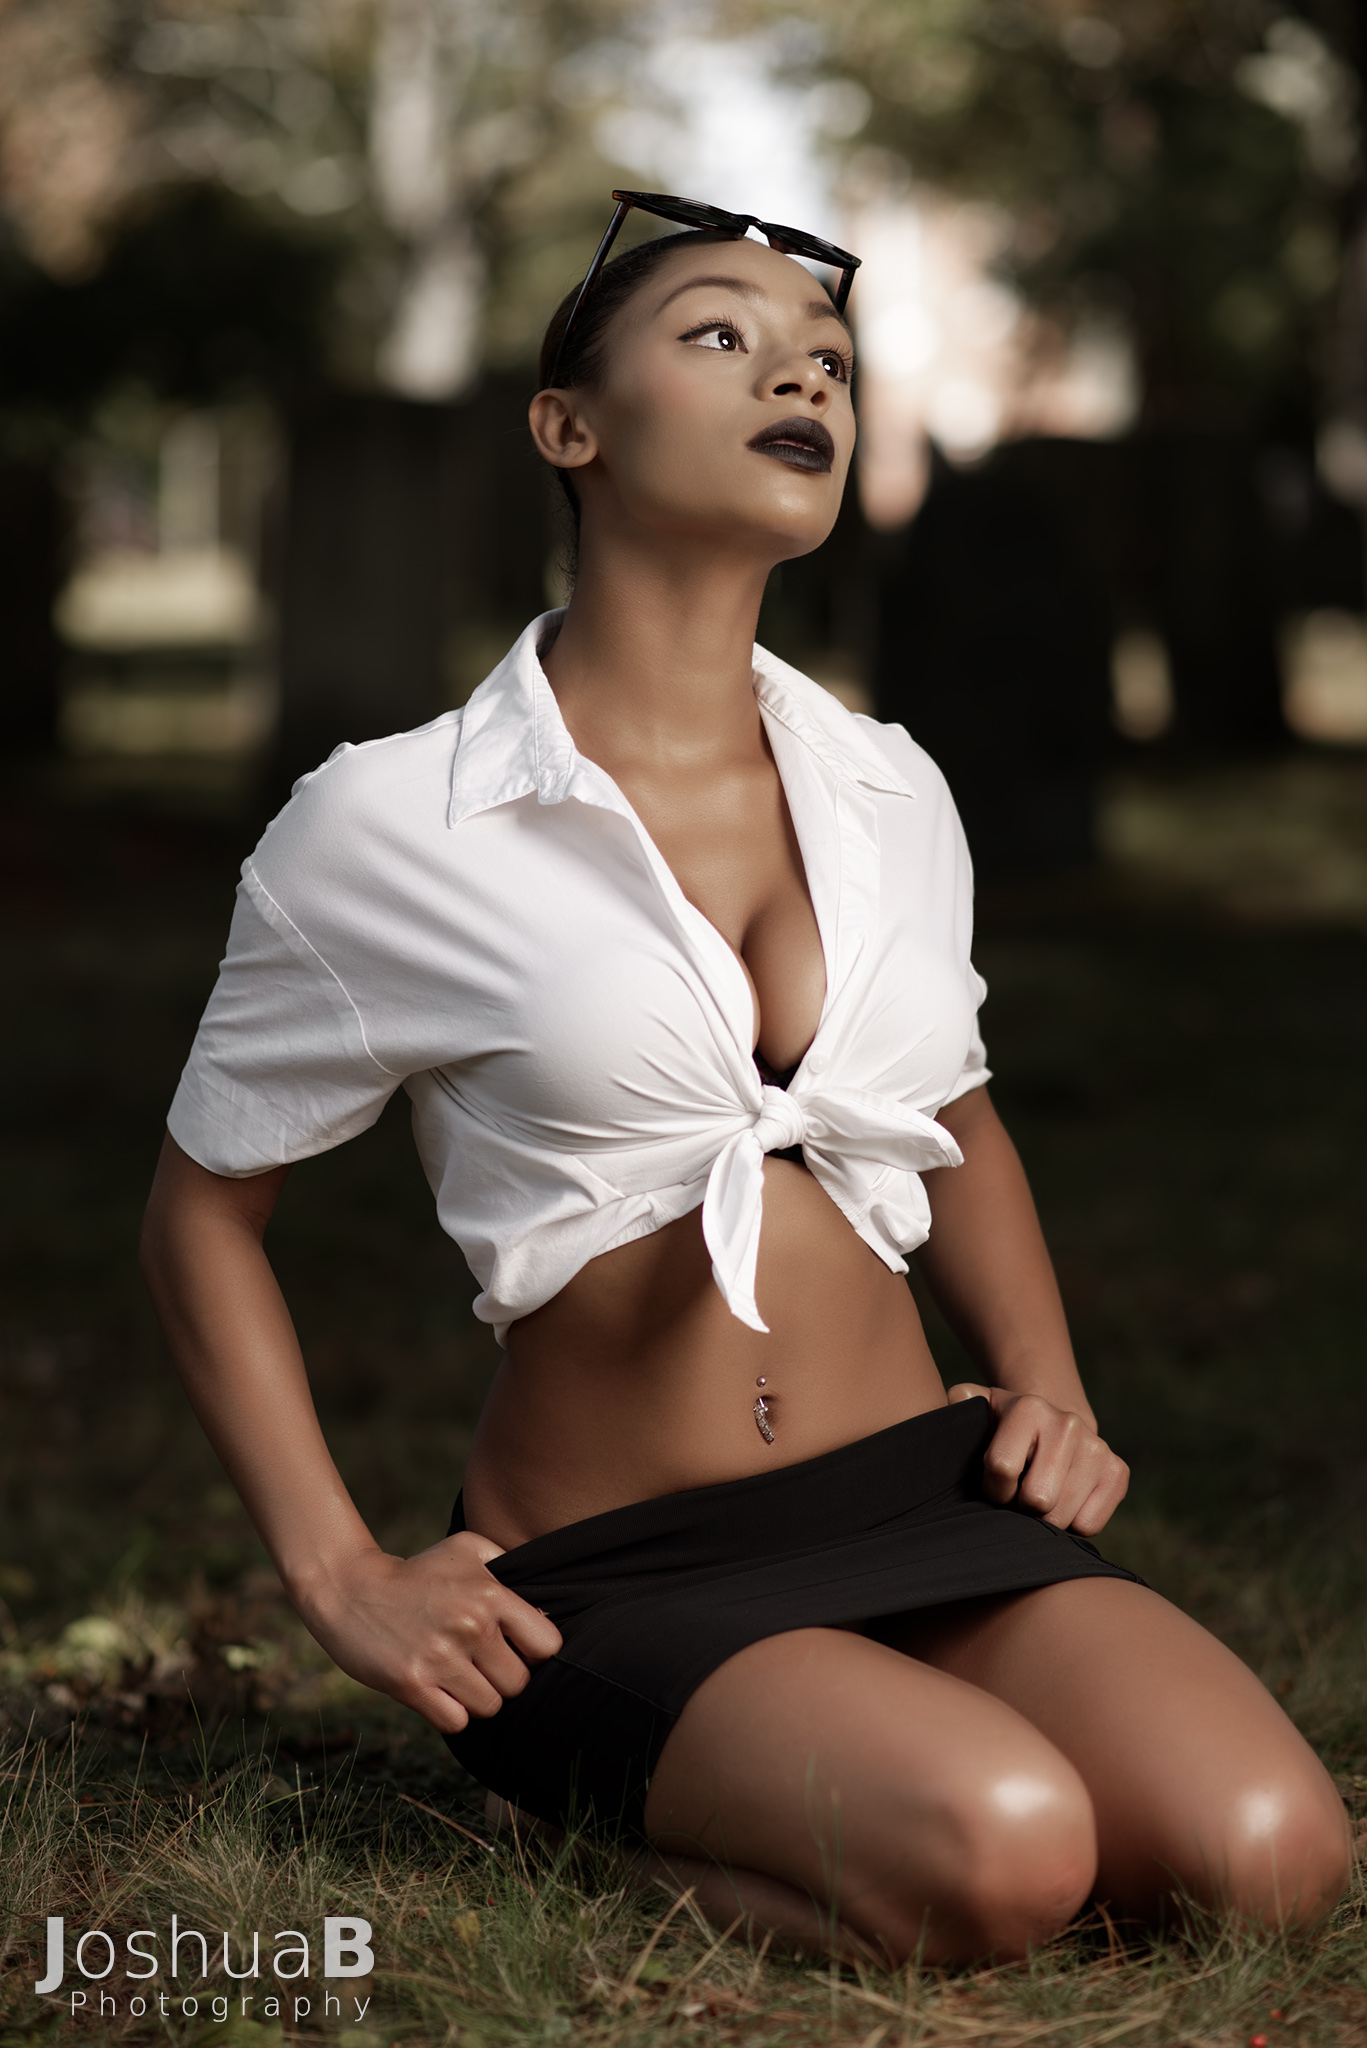 Beautiful Latina in sexy school girl Halloween outfit, looking up